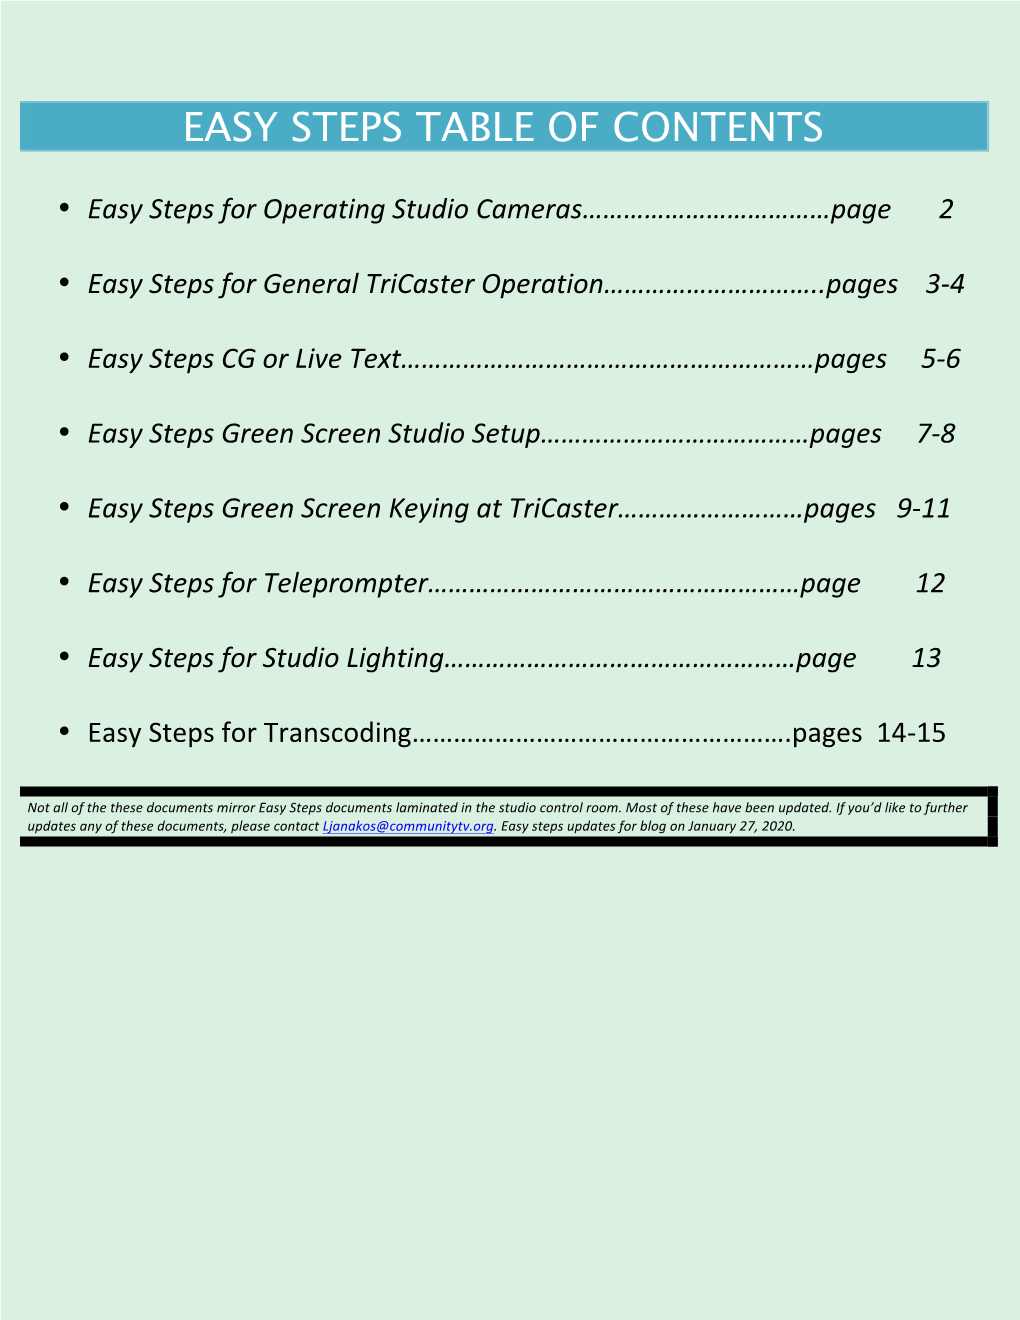 Easy Steps Table of Contents